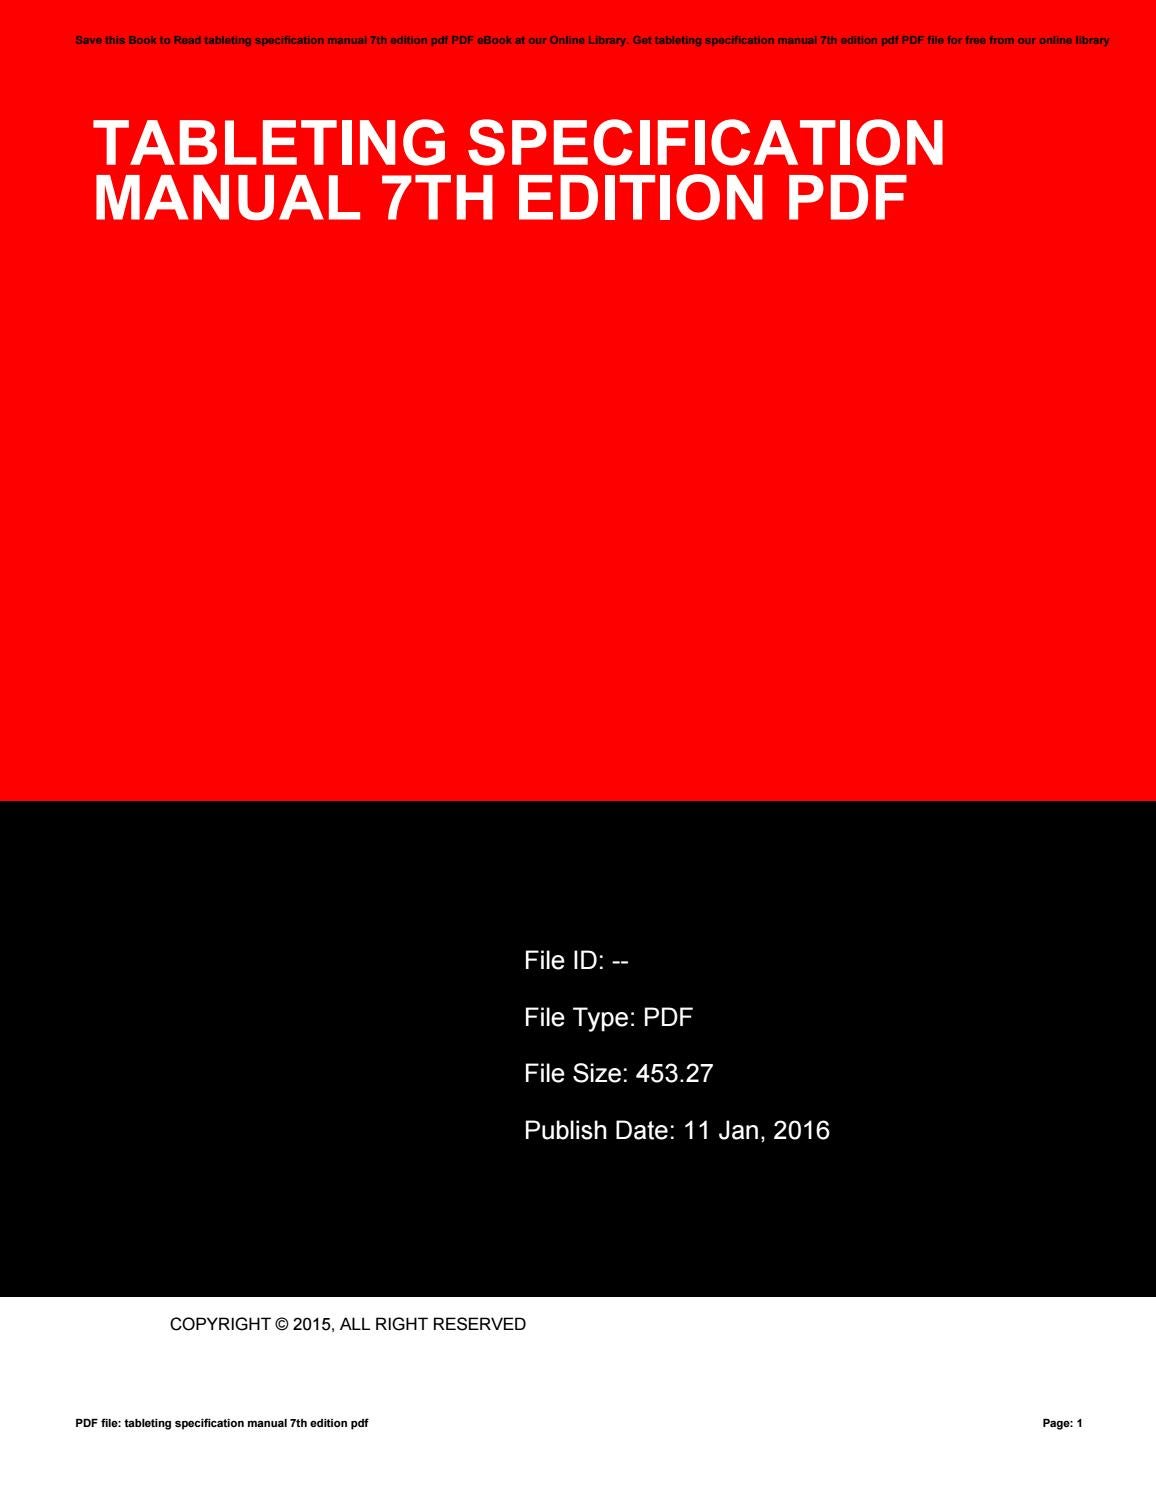 tableting specification manual pdf free